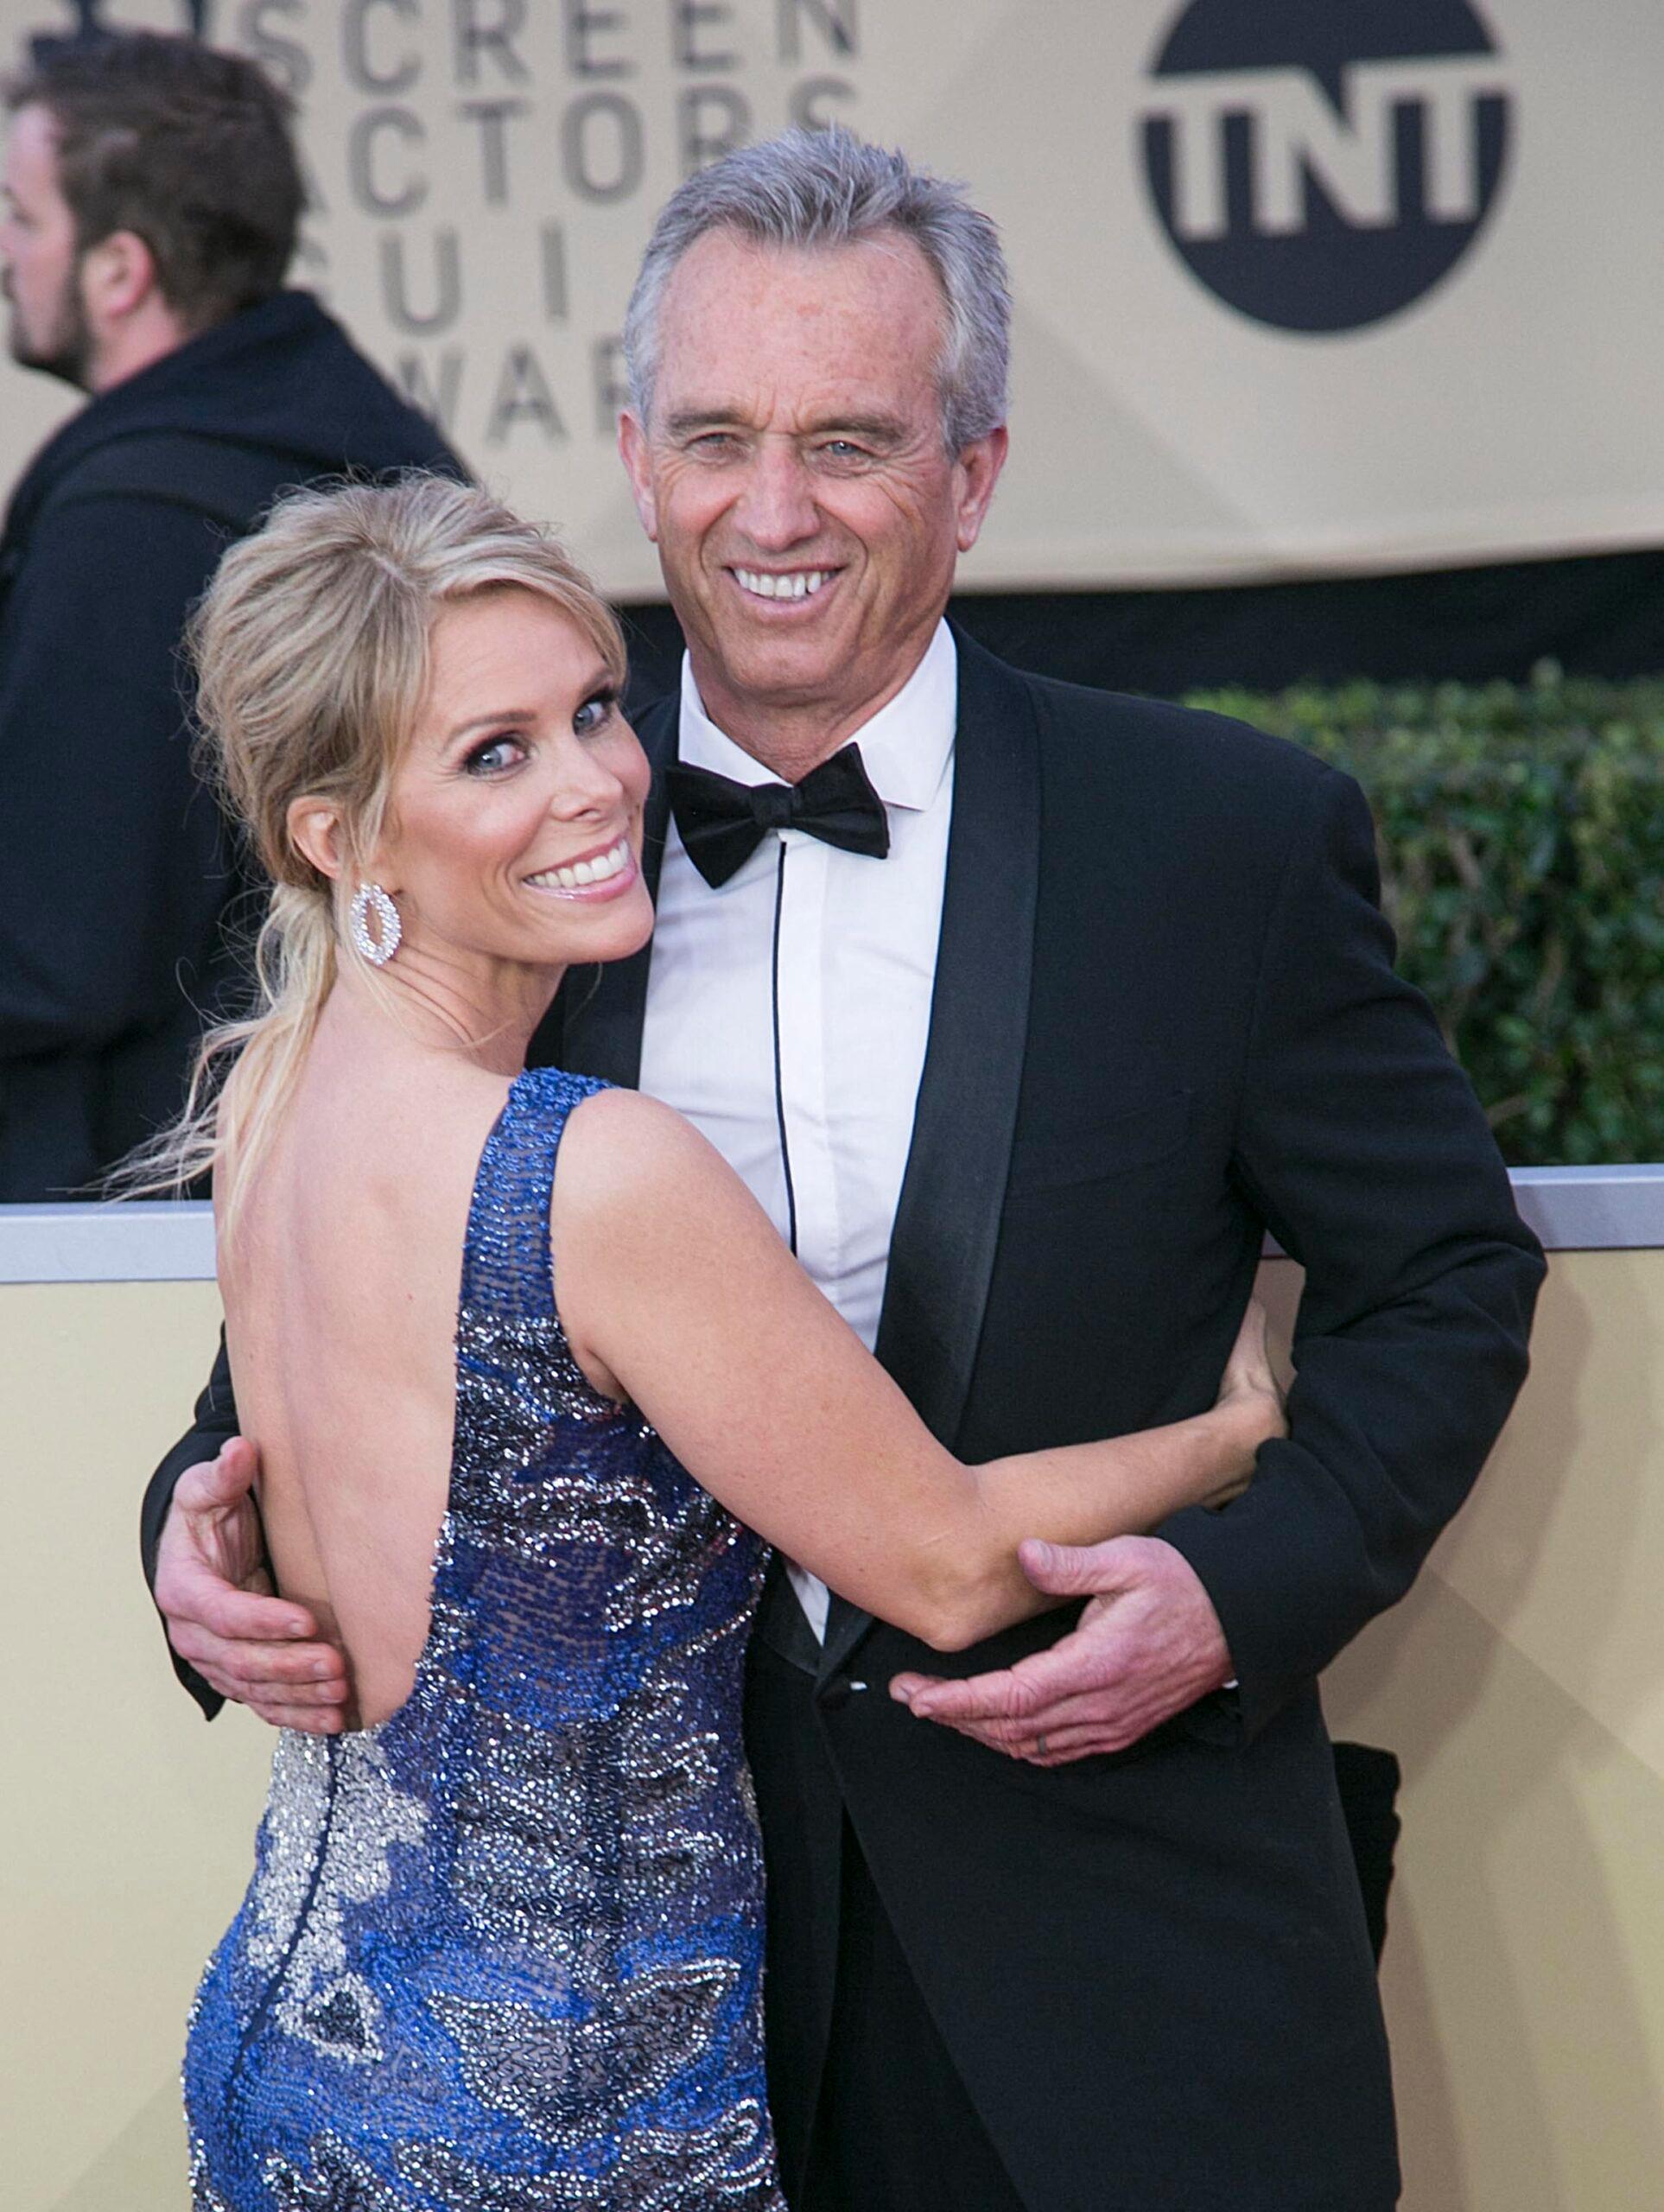 Cheryl Hines and Robert F. Kennedy at the red carpet of the 24th Annual Screen Actors Guild Awards